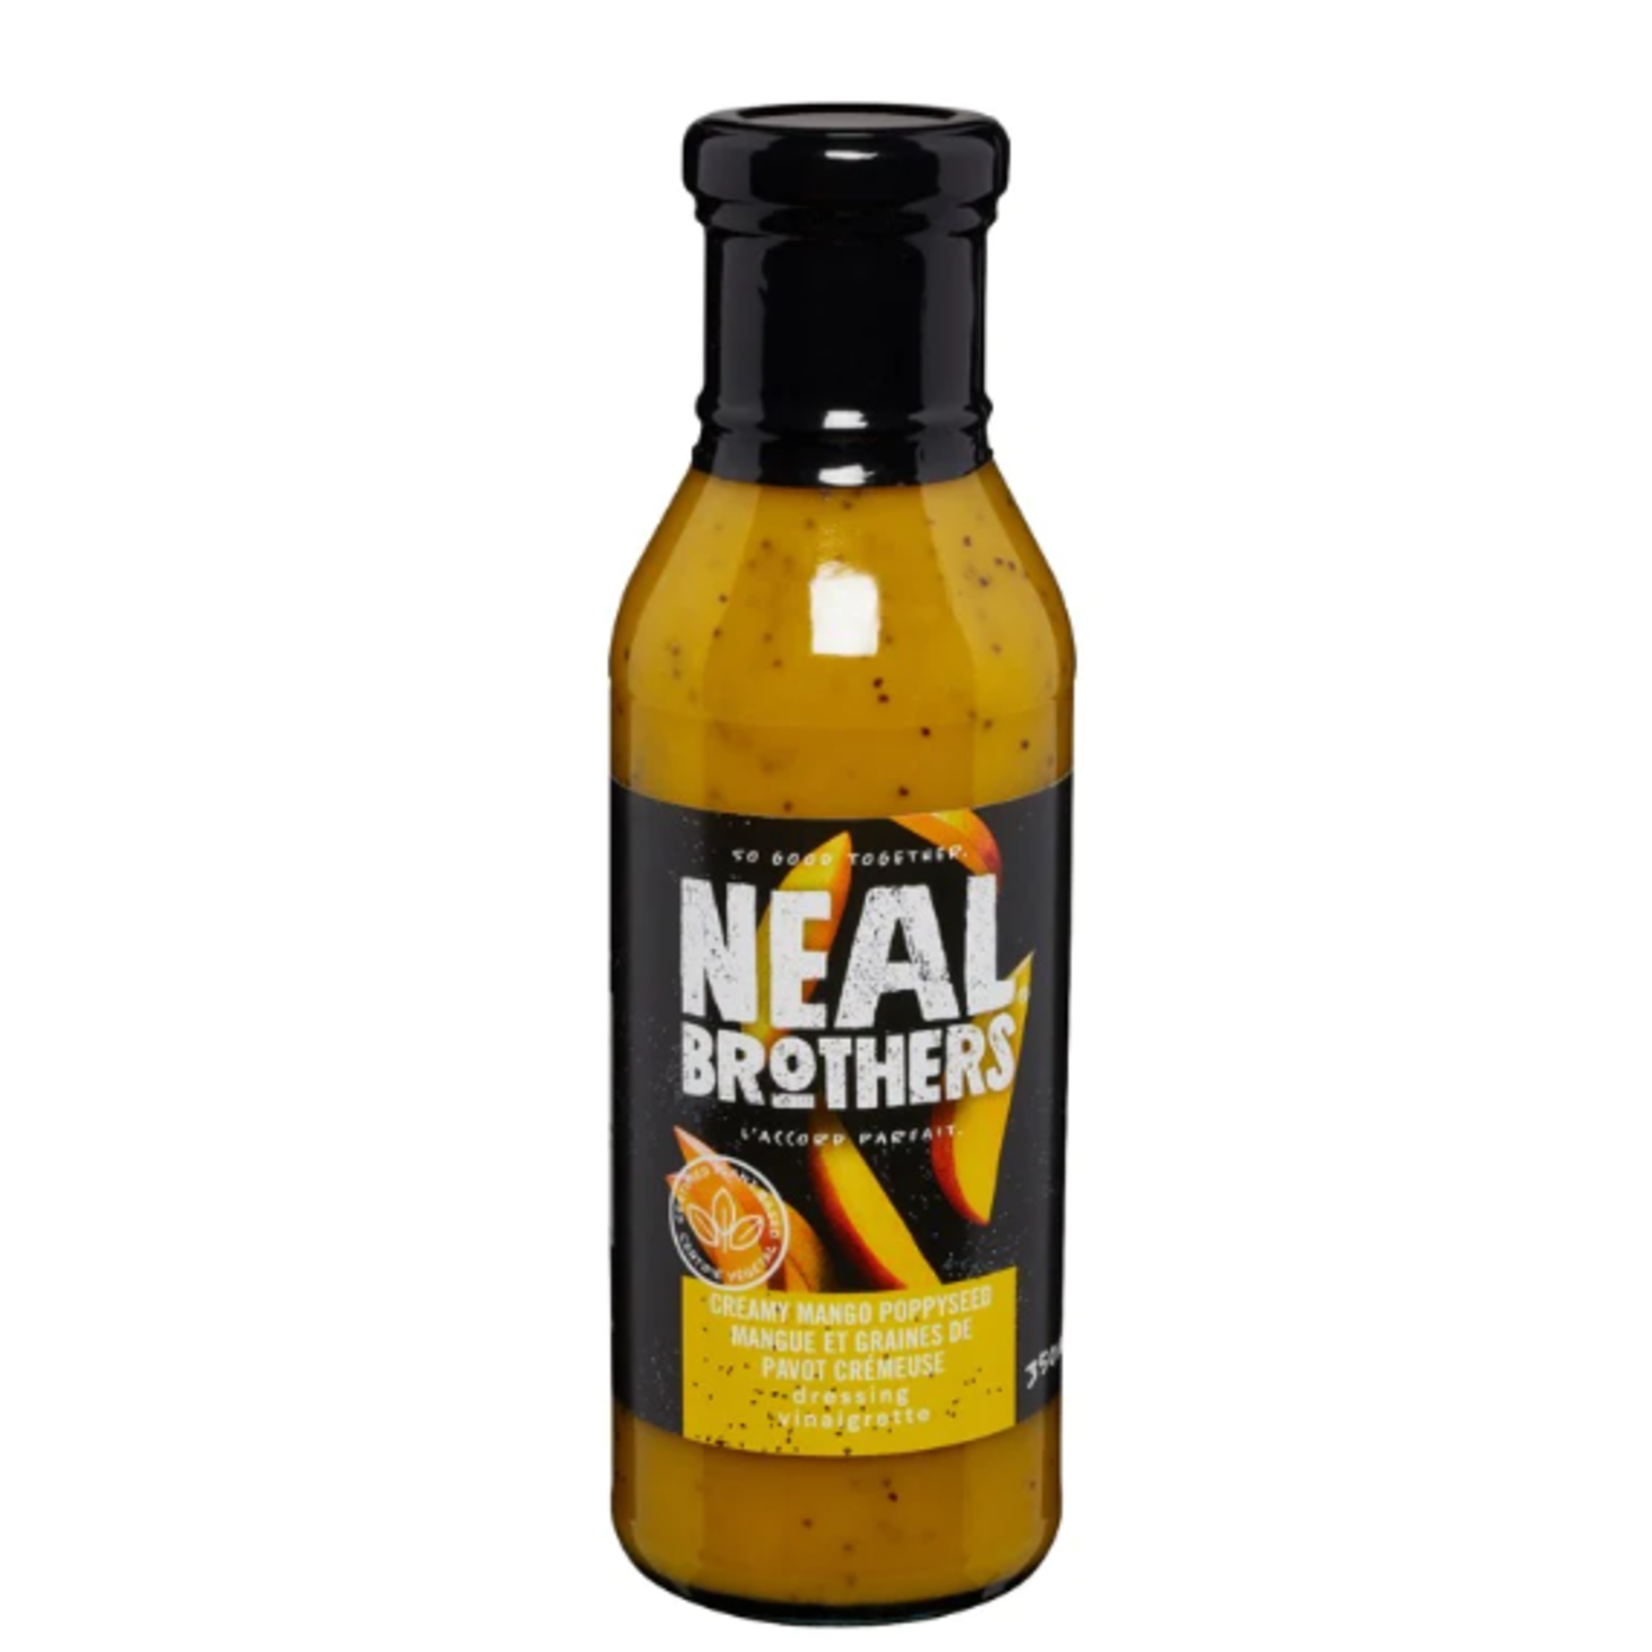 NEAL BROTHERS NEAL BROTHERS MANGO POPPYSEED